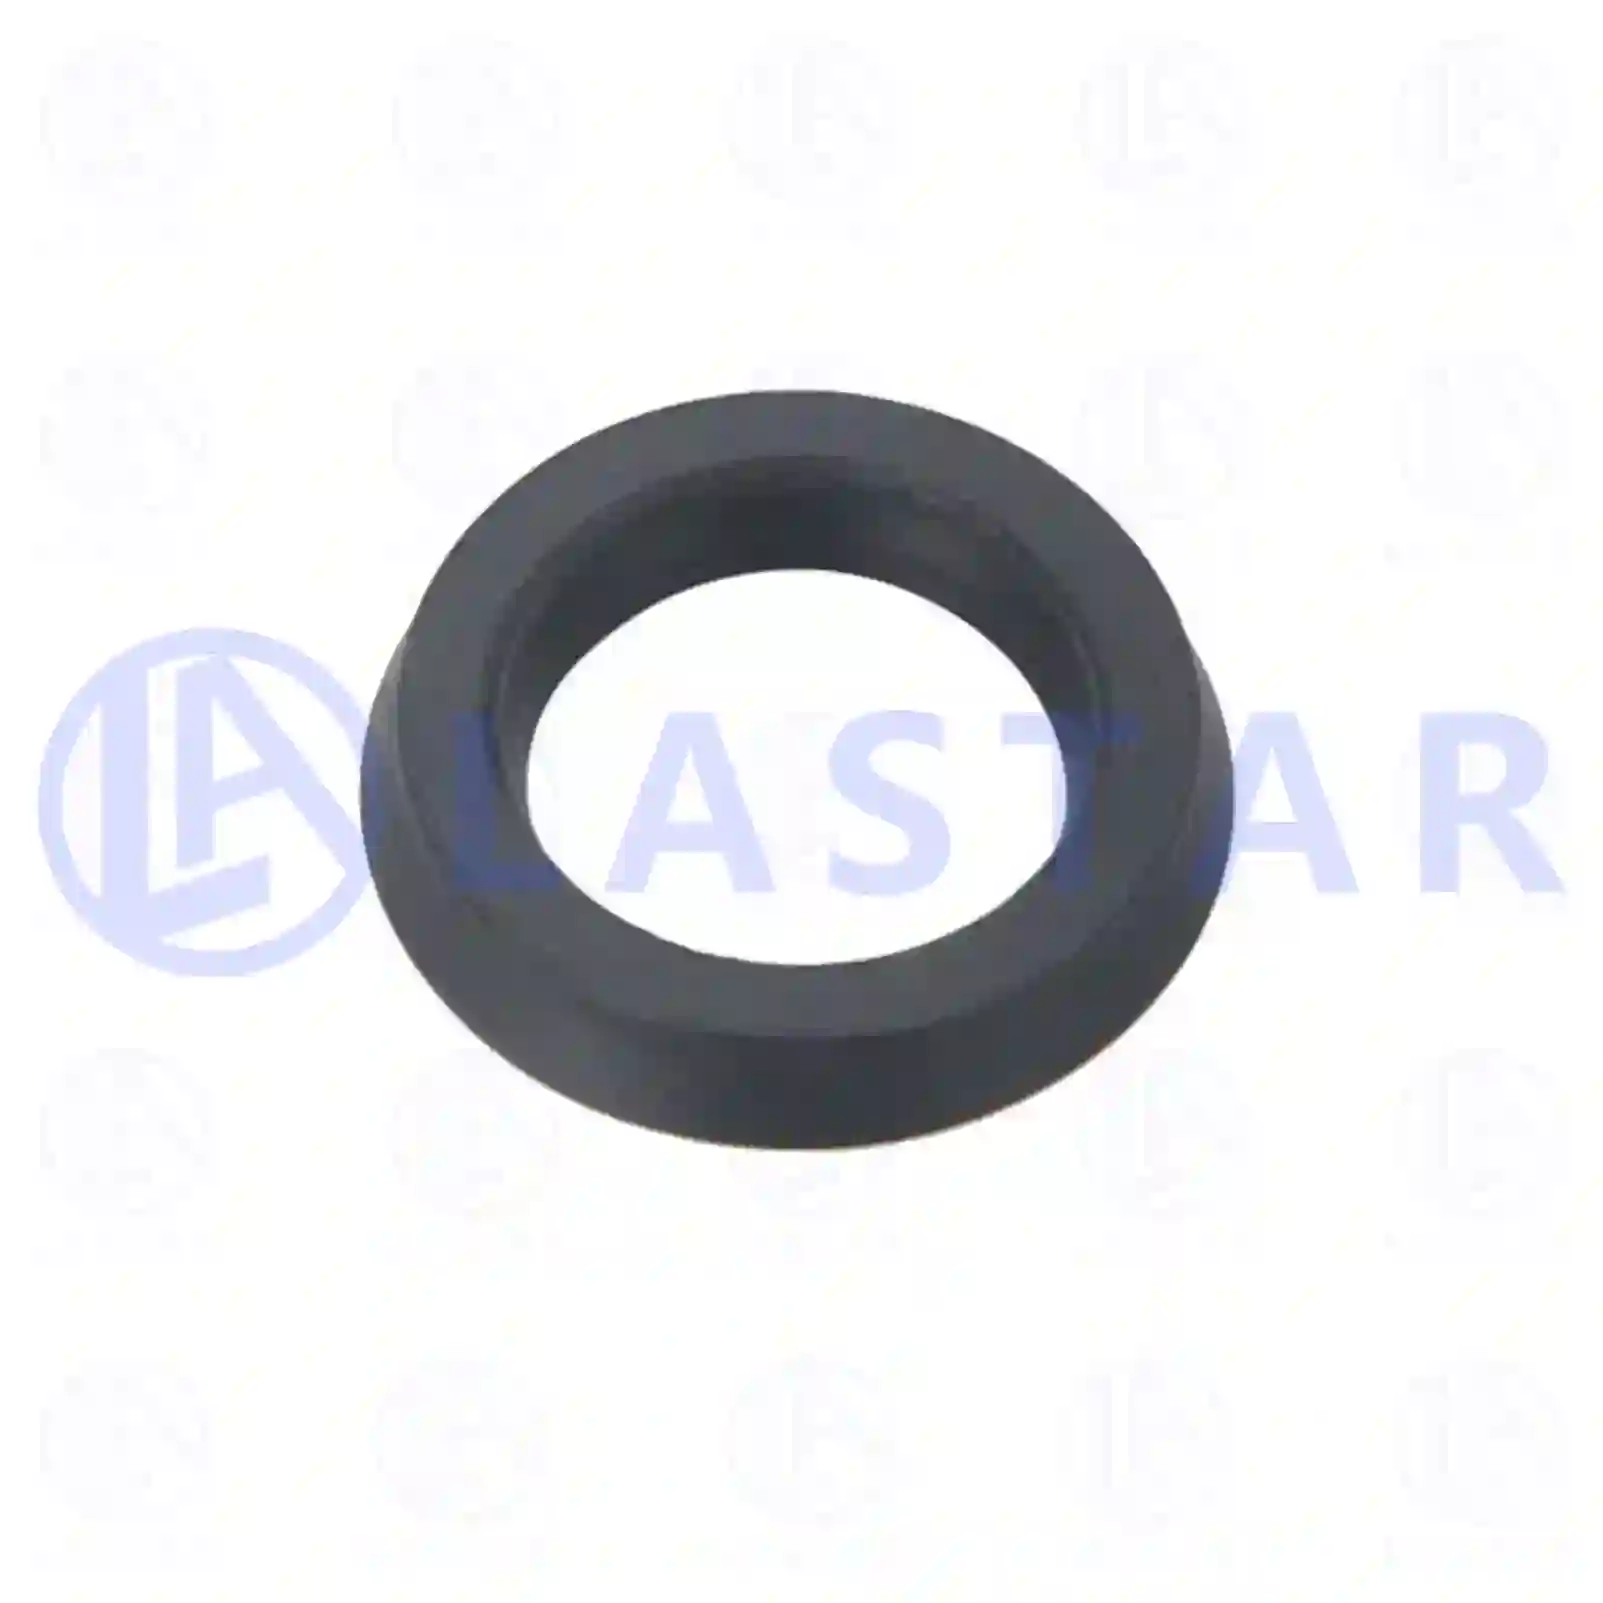 Seal ring, 77702131, 467304, , ||  77702131 Lastar Spare Part | Truck Spare Parts, Auotomotive Spare Parts Seal ring, 77702131, 467304, , ||  77702131 Lastar Spare Part | Truck Spare Parts, Auotomotive Spare Parts